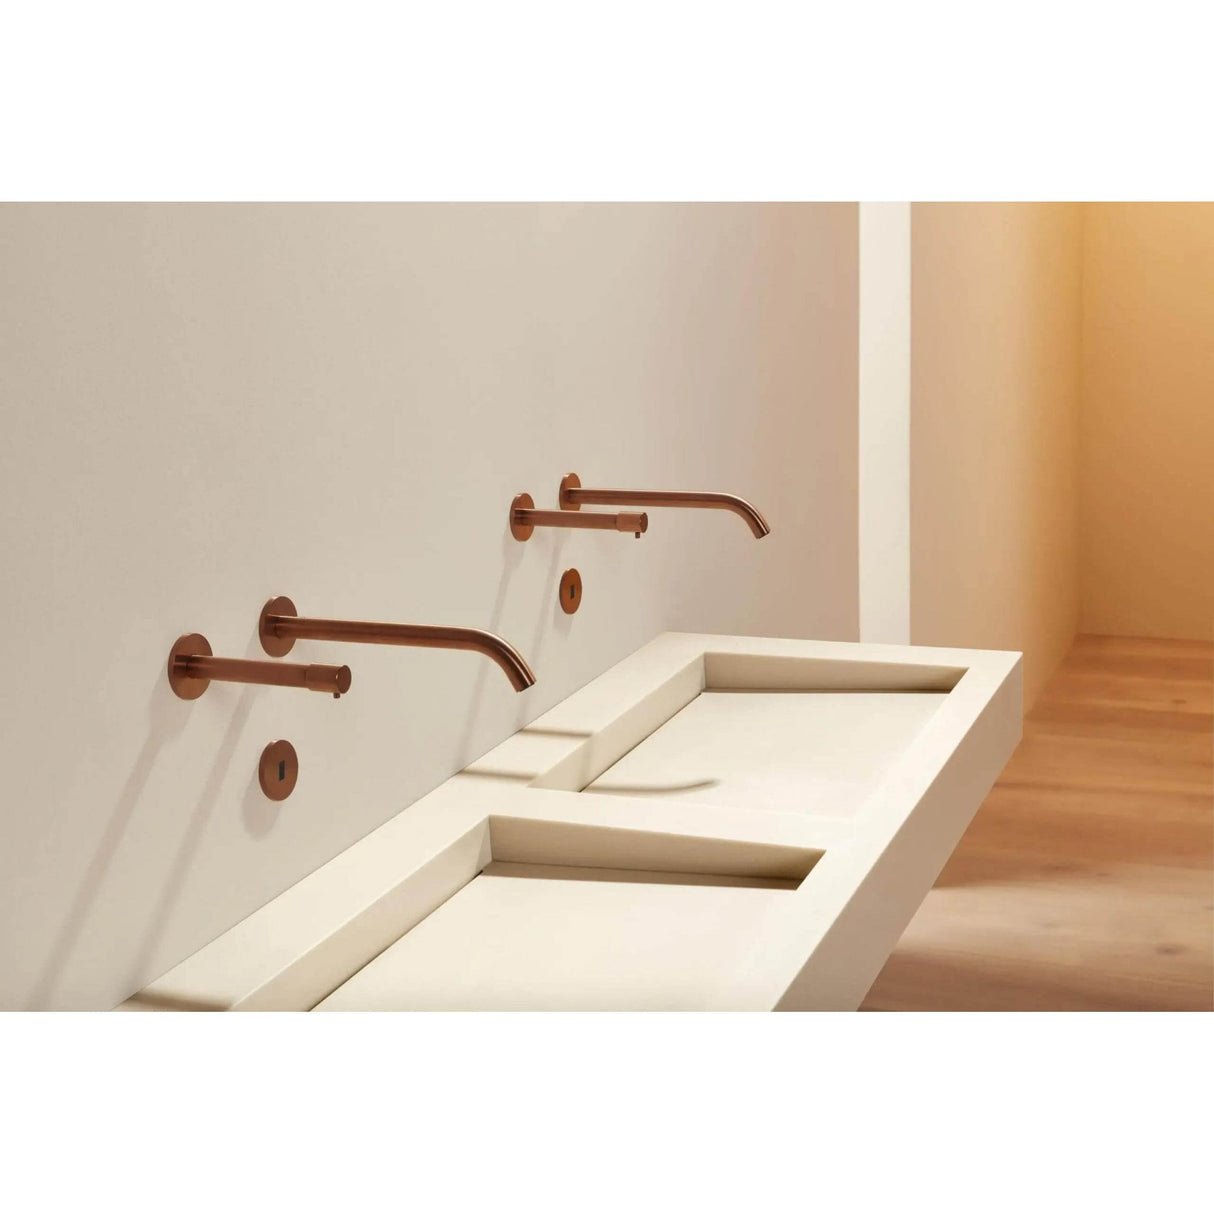 The Monolith M+ or L+ Series Wall Mounted Wash Basin L.1800mm (450 or 600mm Depth)